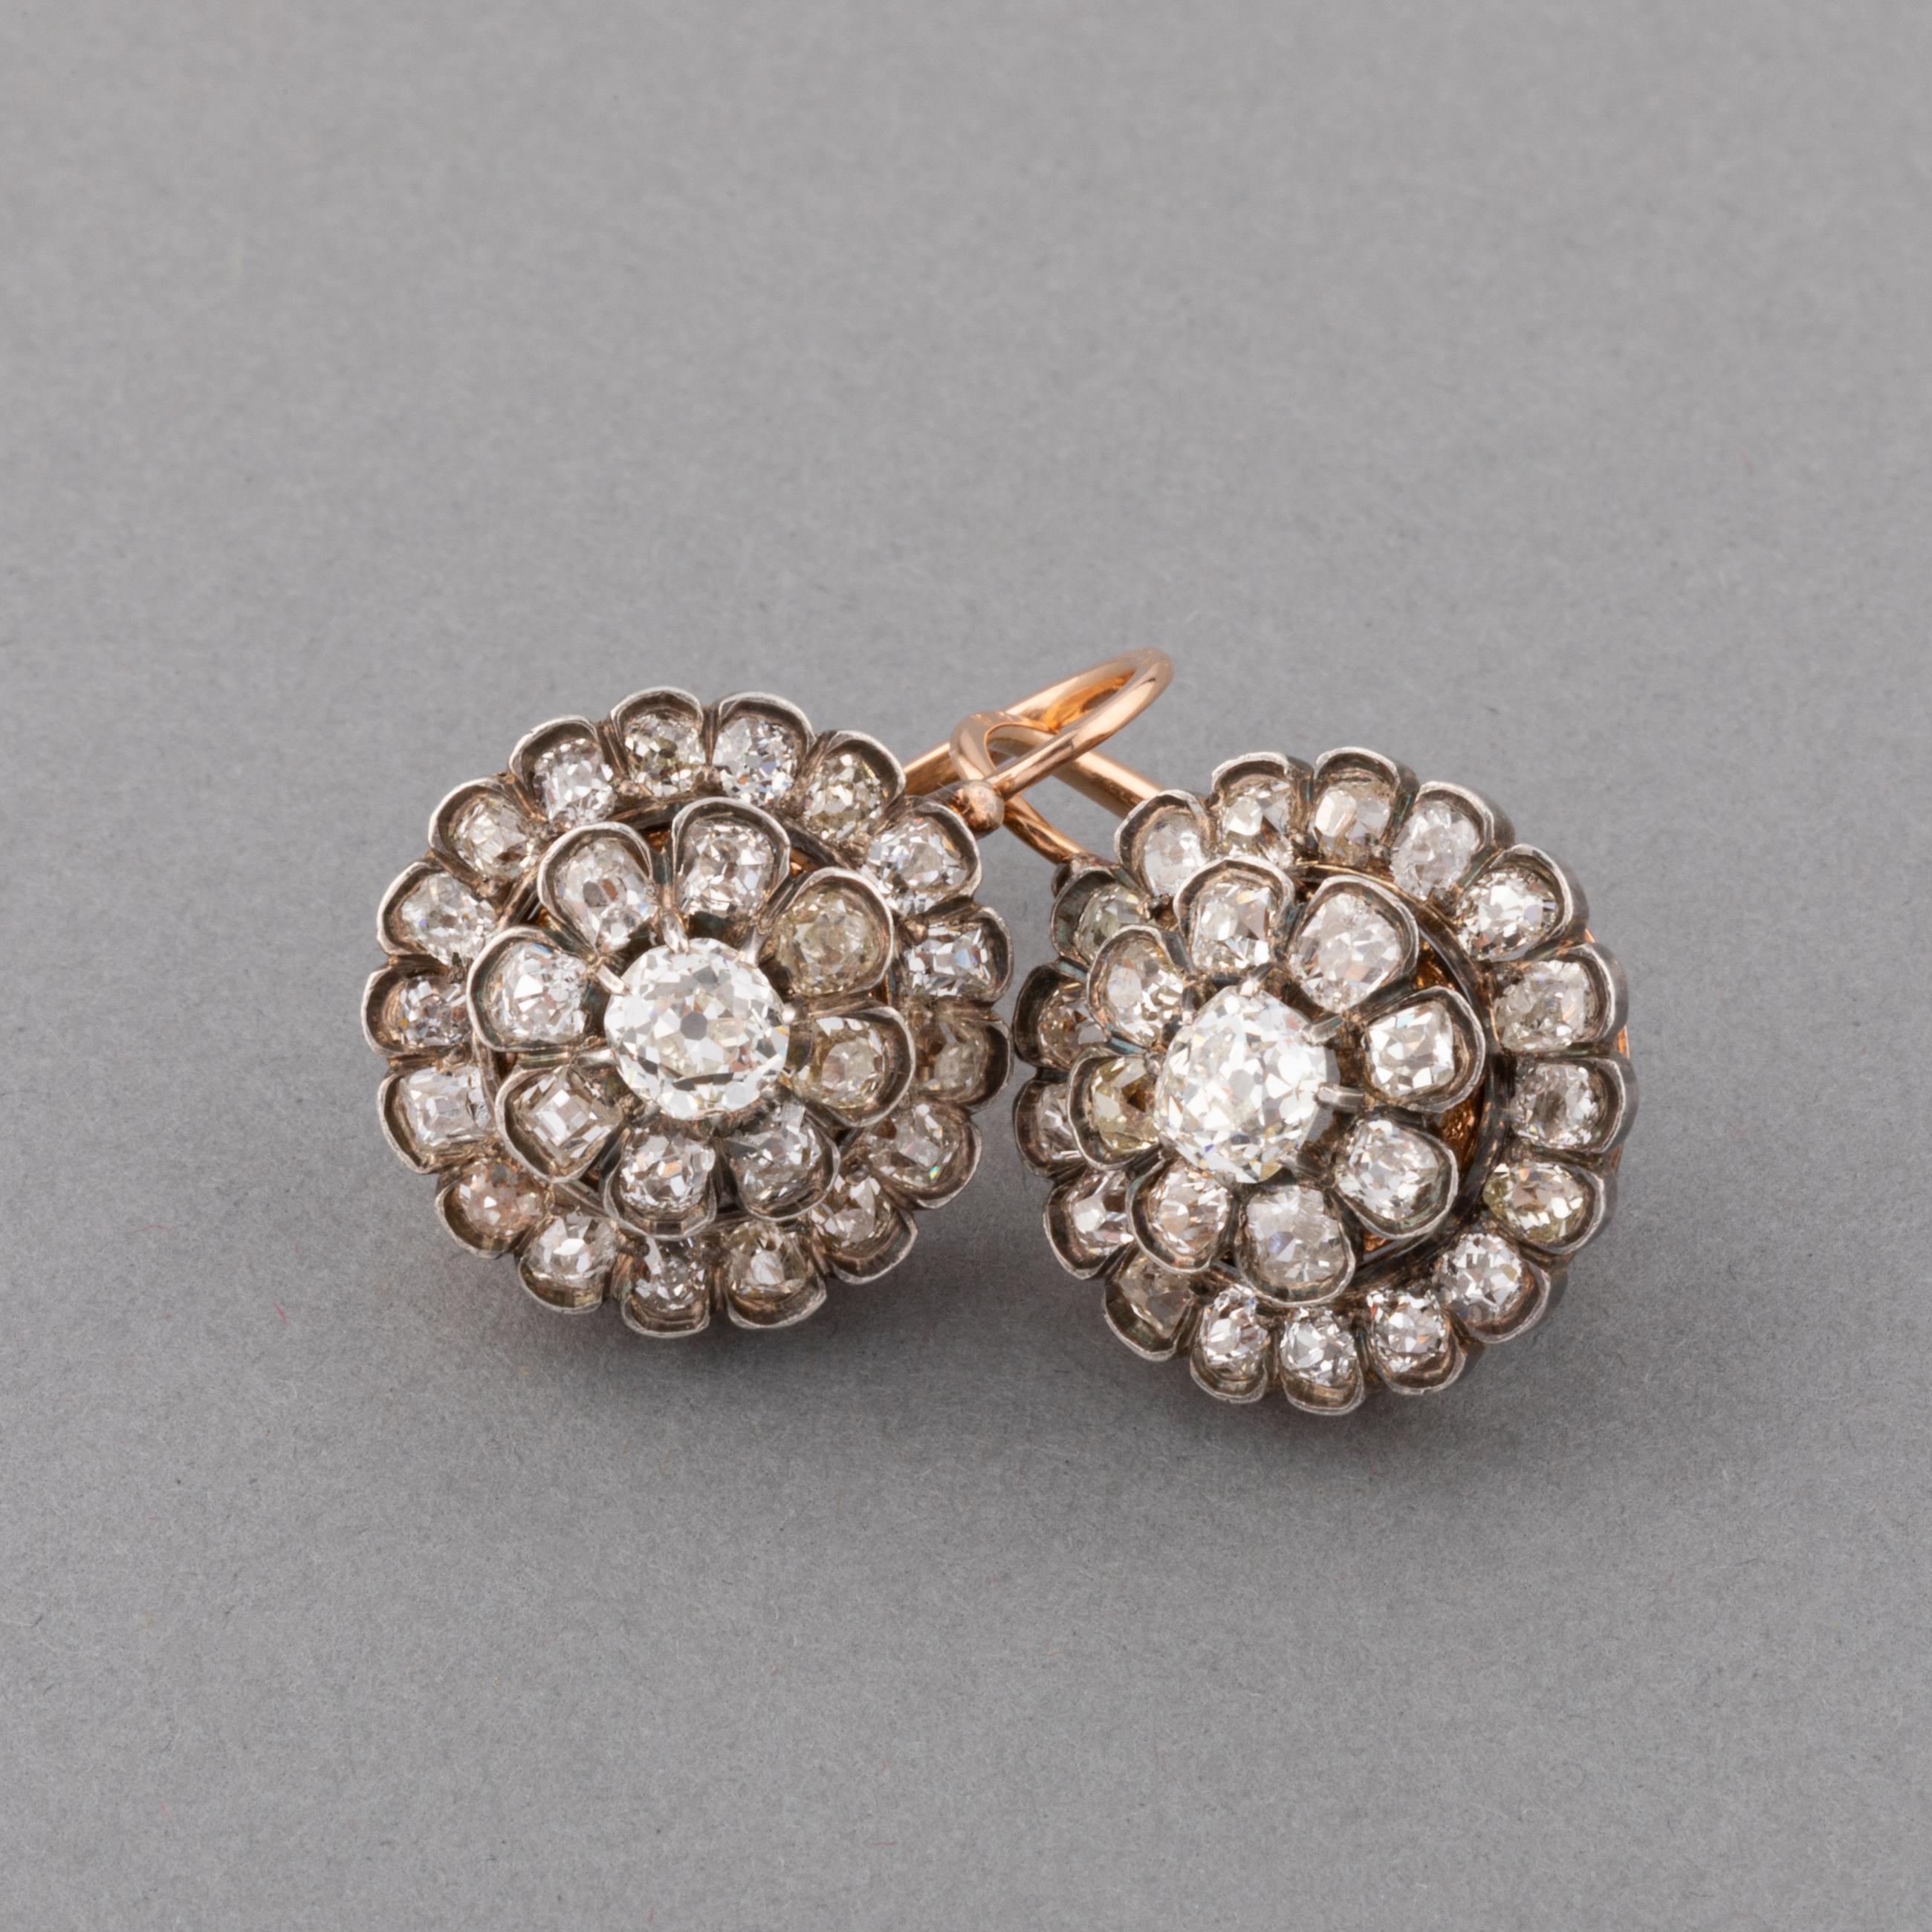 One very lovely pair of antique 19th century diamonds earrings.
Made in France circa 1850.
Made in rose gold 18k, silver and set with 5 carats or Old mine cut diamonds.
Diameter of cluster: 17mm. Total height: 23mm.
Weight: 8.70 grams.